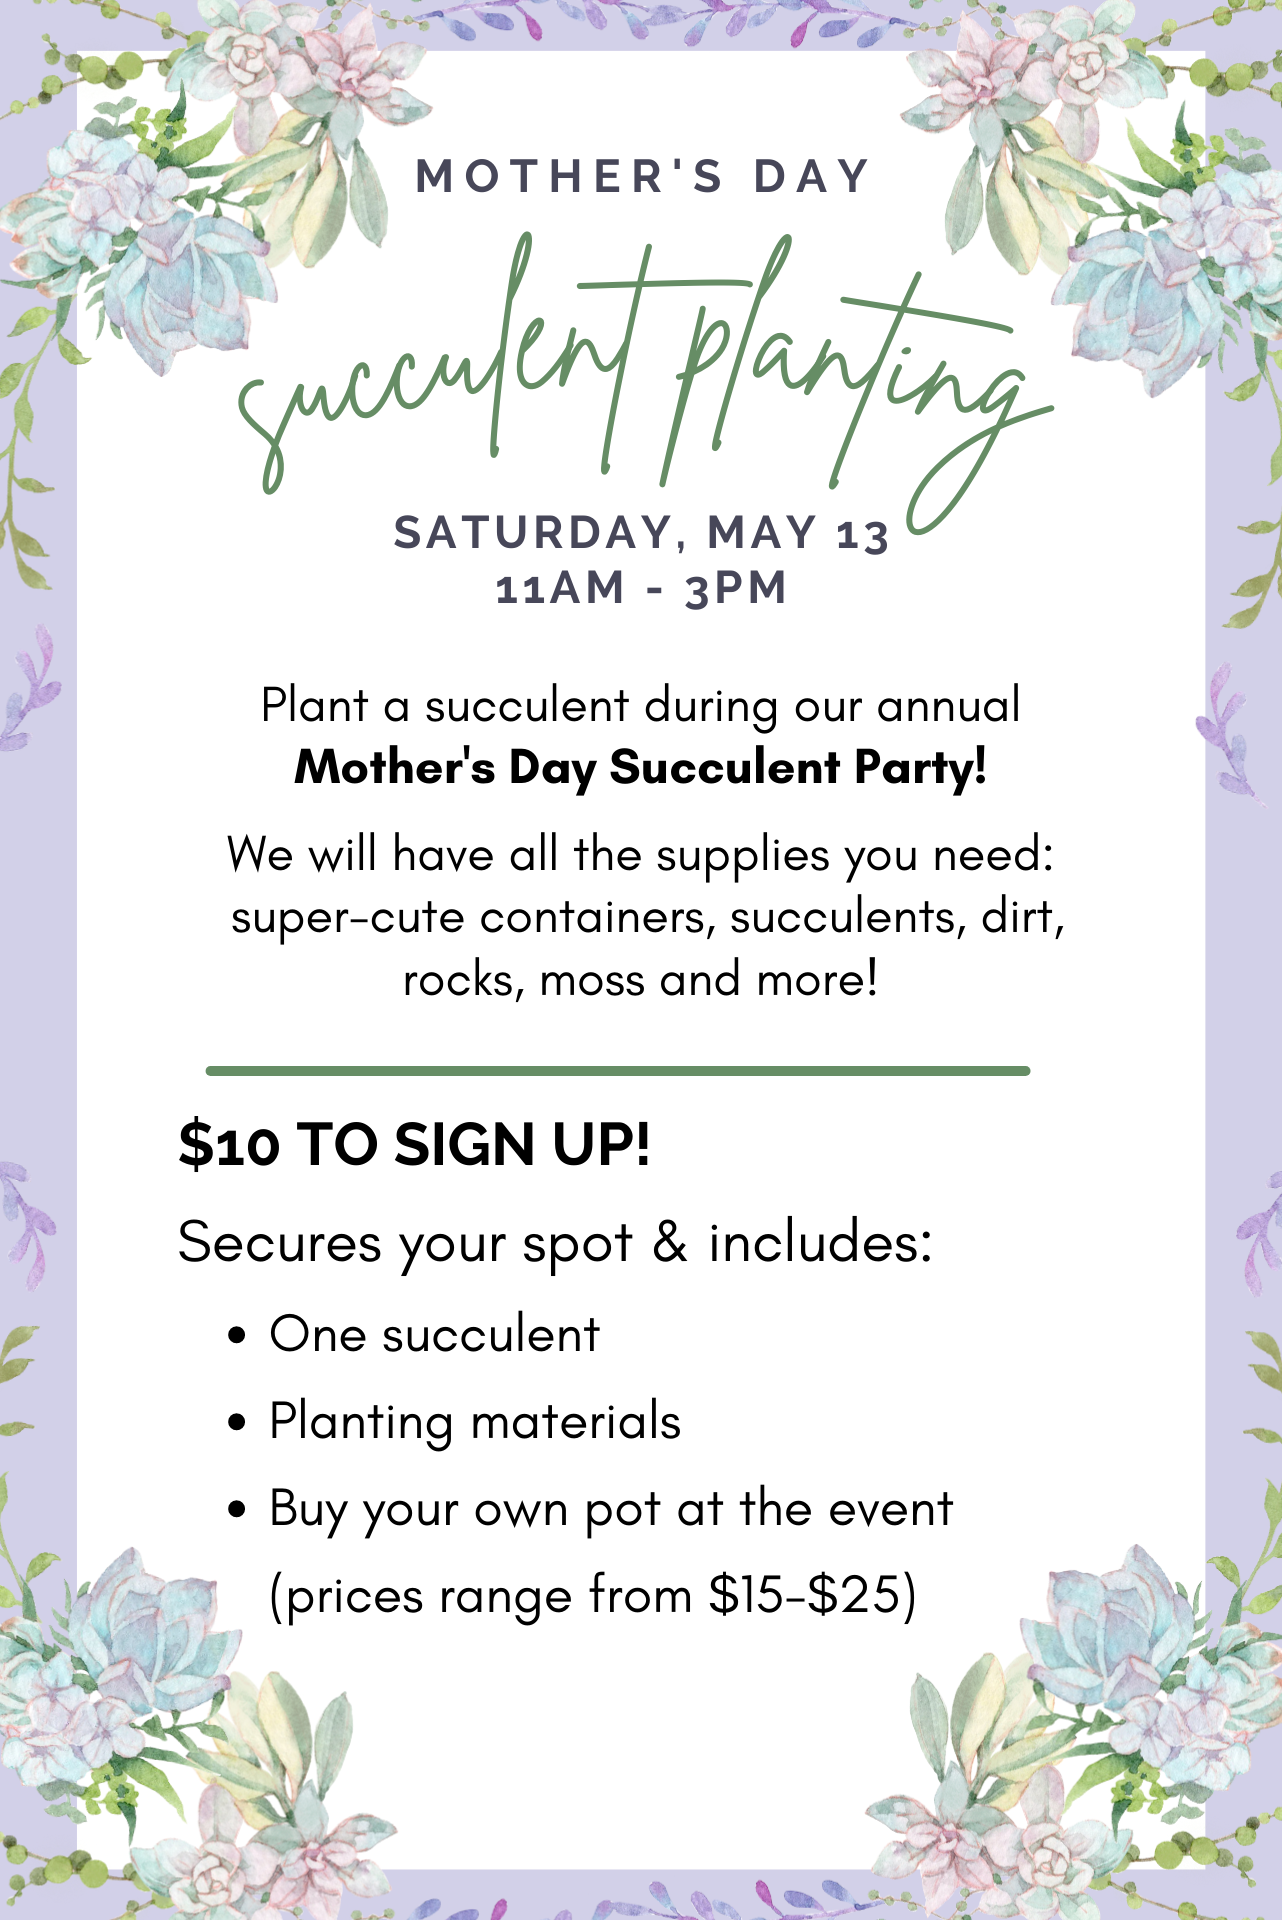 Mother's Day Succulent Party!